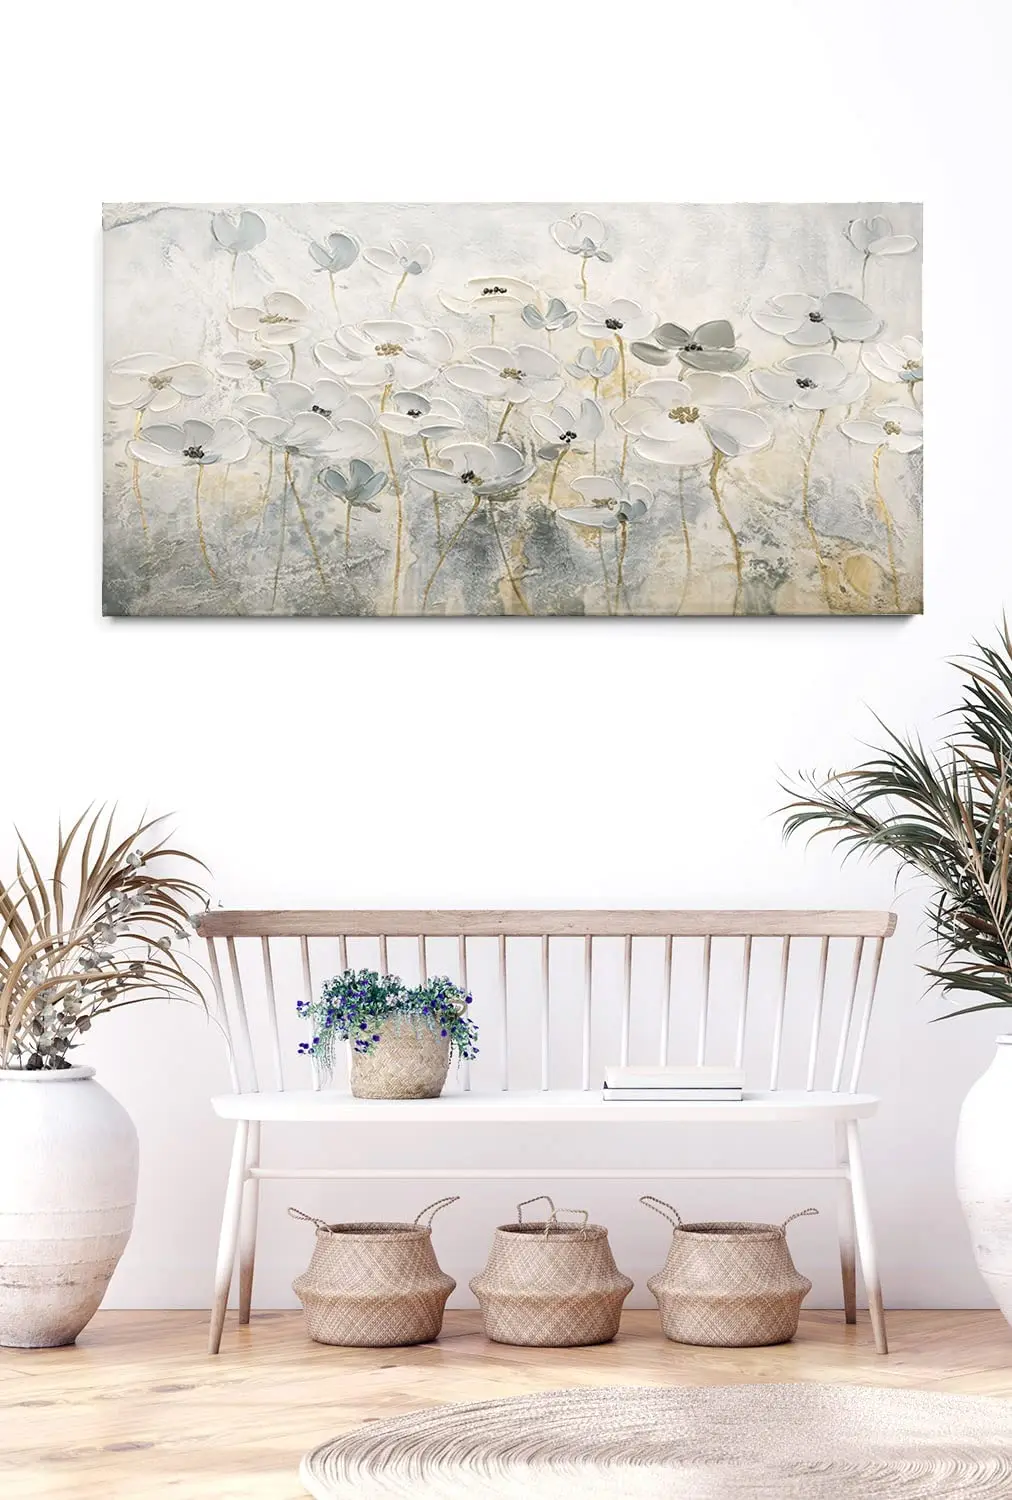 

Blossom White Flower Wall Art Textured 3D Hand-Painted Oil Painting on Canvas For Living Room Bedroom Hotel Home Decor No Framed